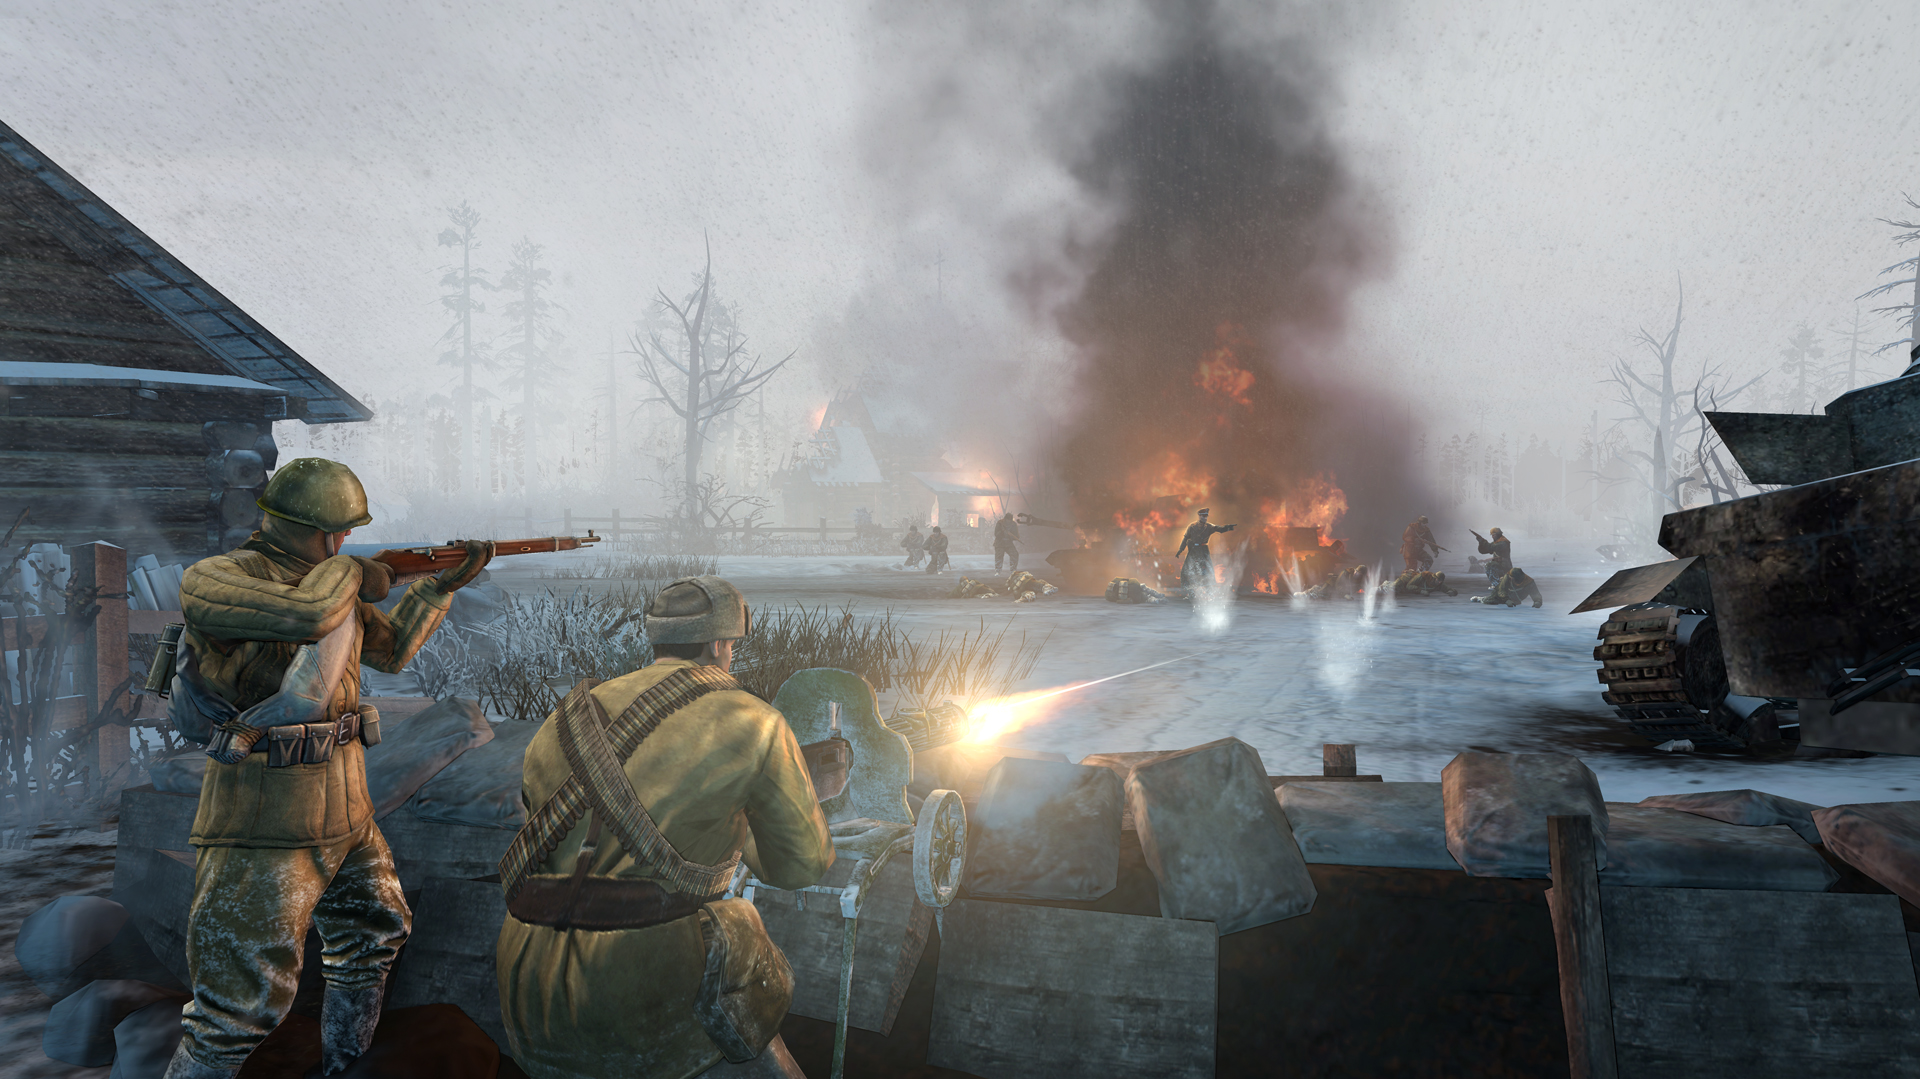 company of heroes 2 does ai cheat on hard difficulty